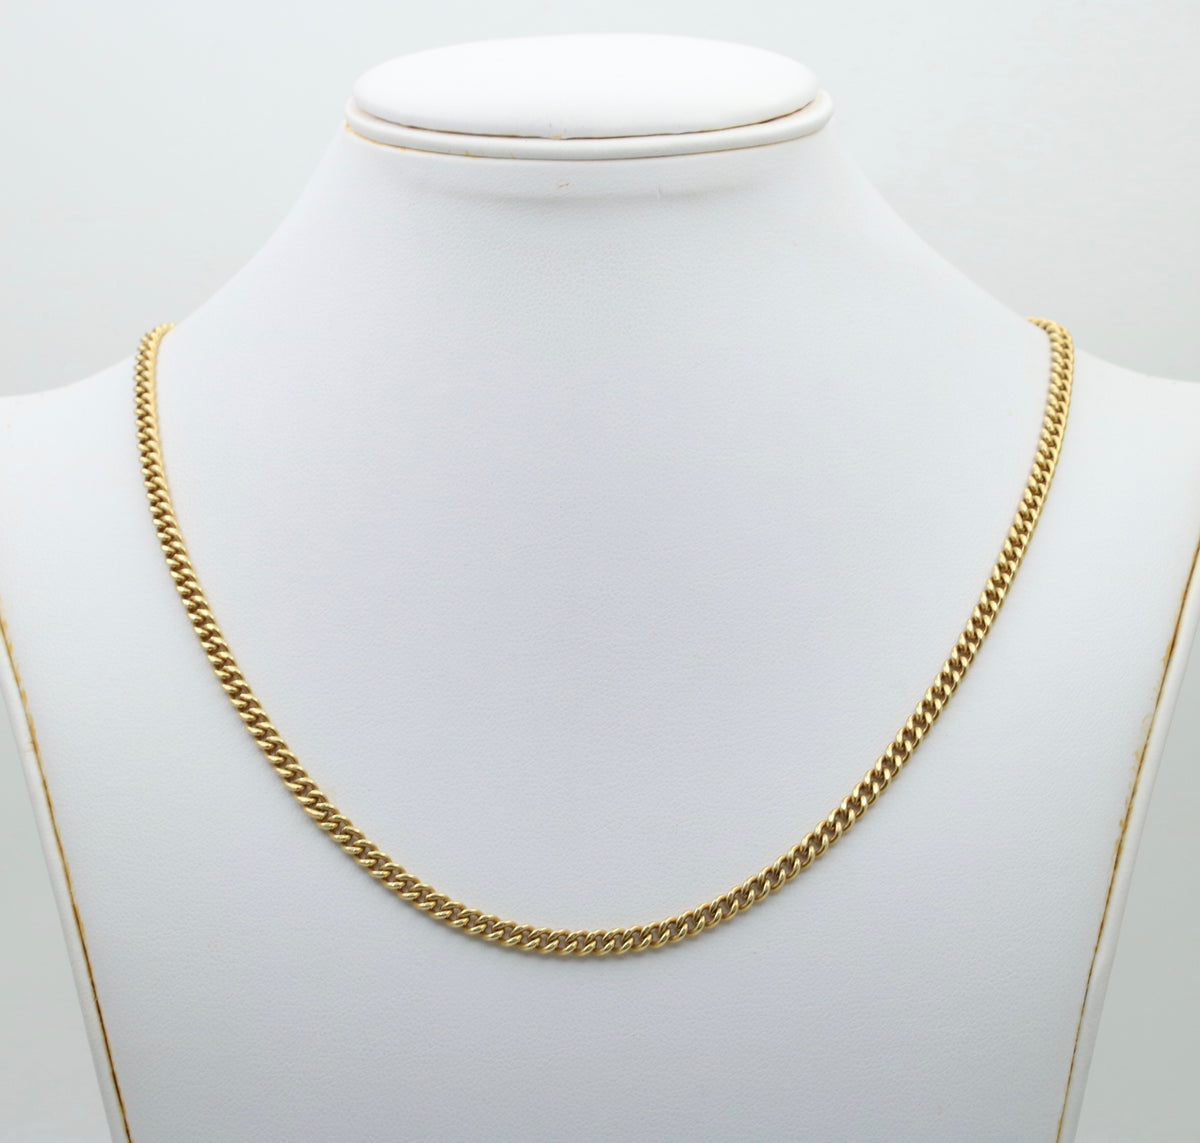 Vintage Tiffany & Co 18K Gold Curb Link Chain, 26.5” Long